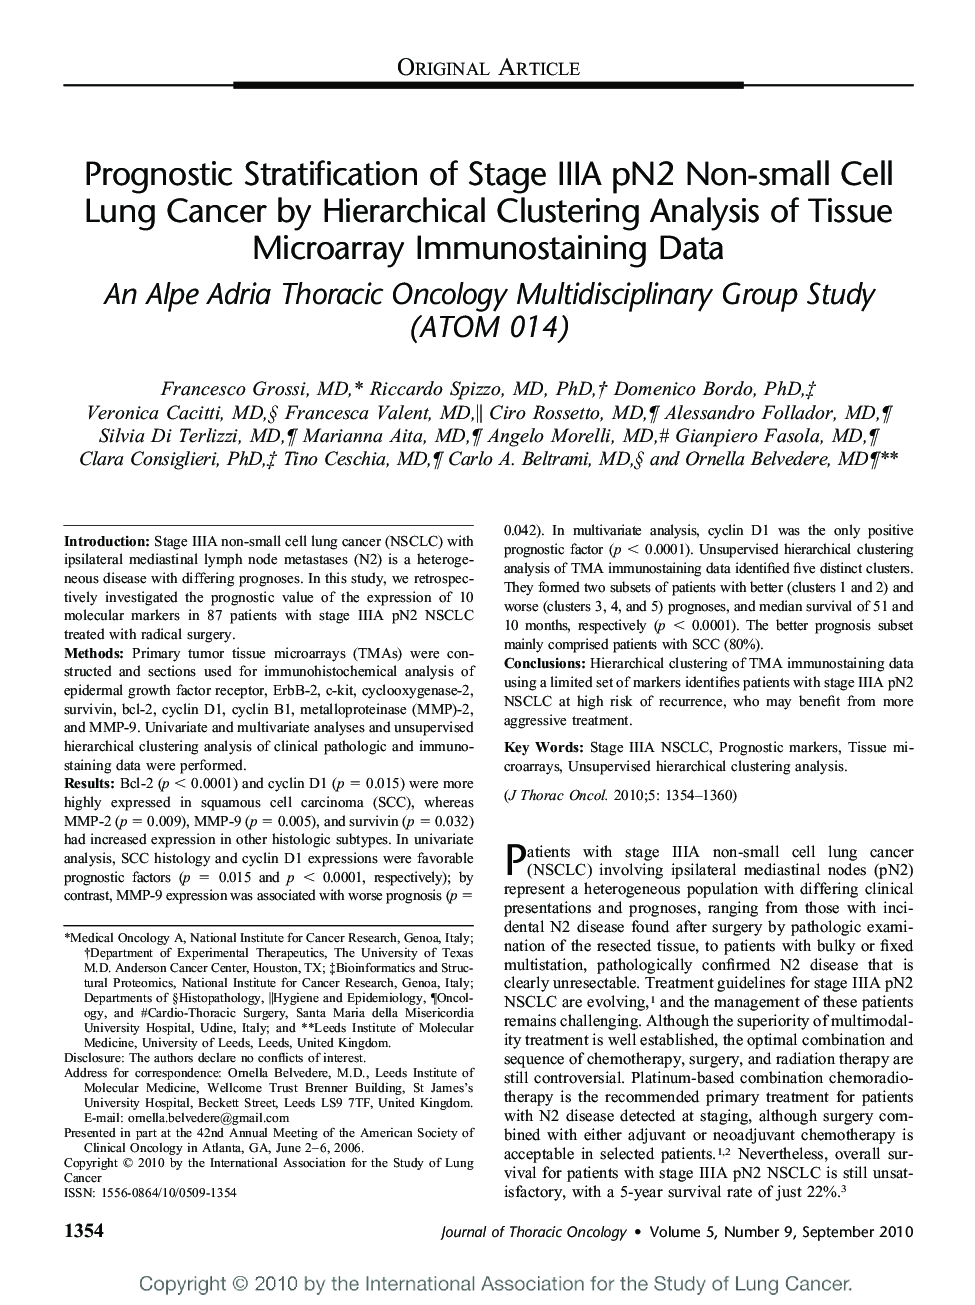 Prognostic Stratification of Stage IIIA pN2 Non-small Cell Lung Cancer by Hierarchical Clustering Analysis of Tissue Microarray Immunostaining Data: An Alpe Adria Thoracic Oncology Multidisciplinary Group Study (ATOM 014) 